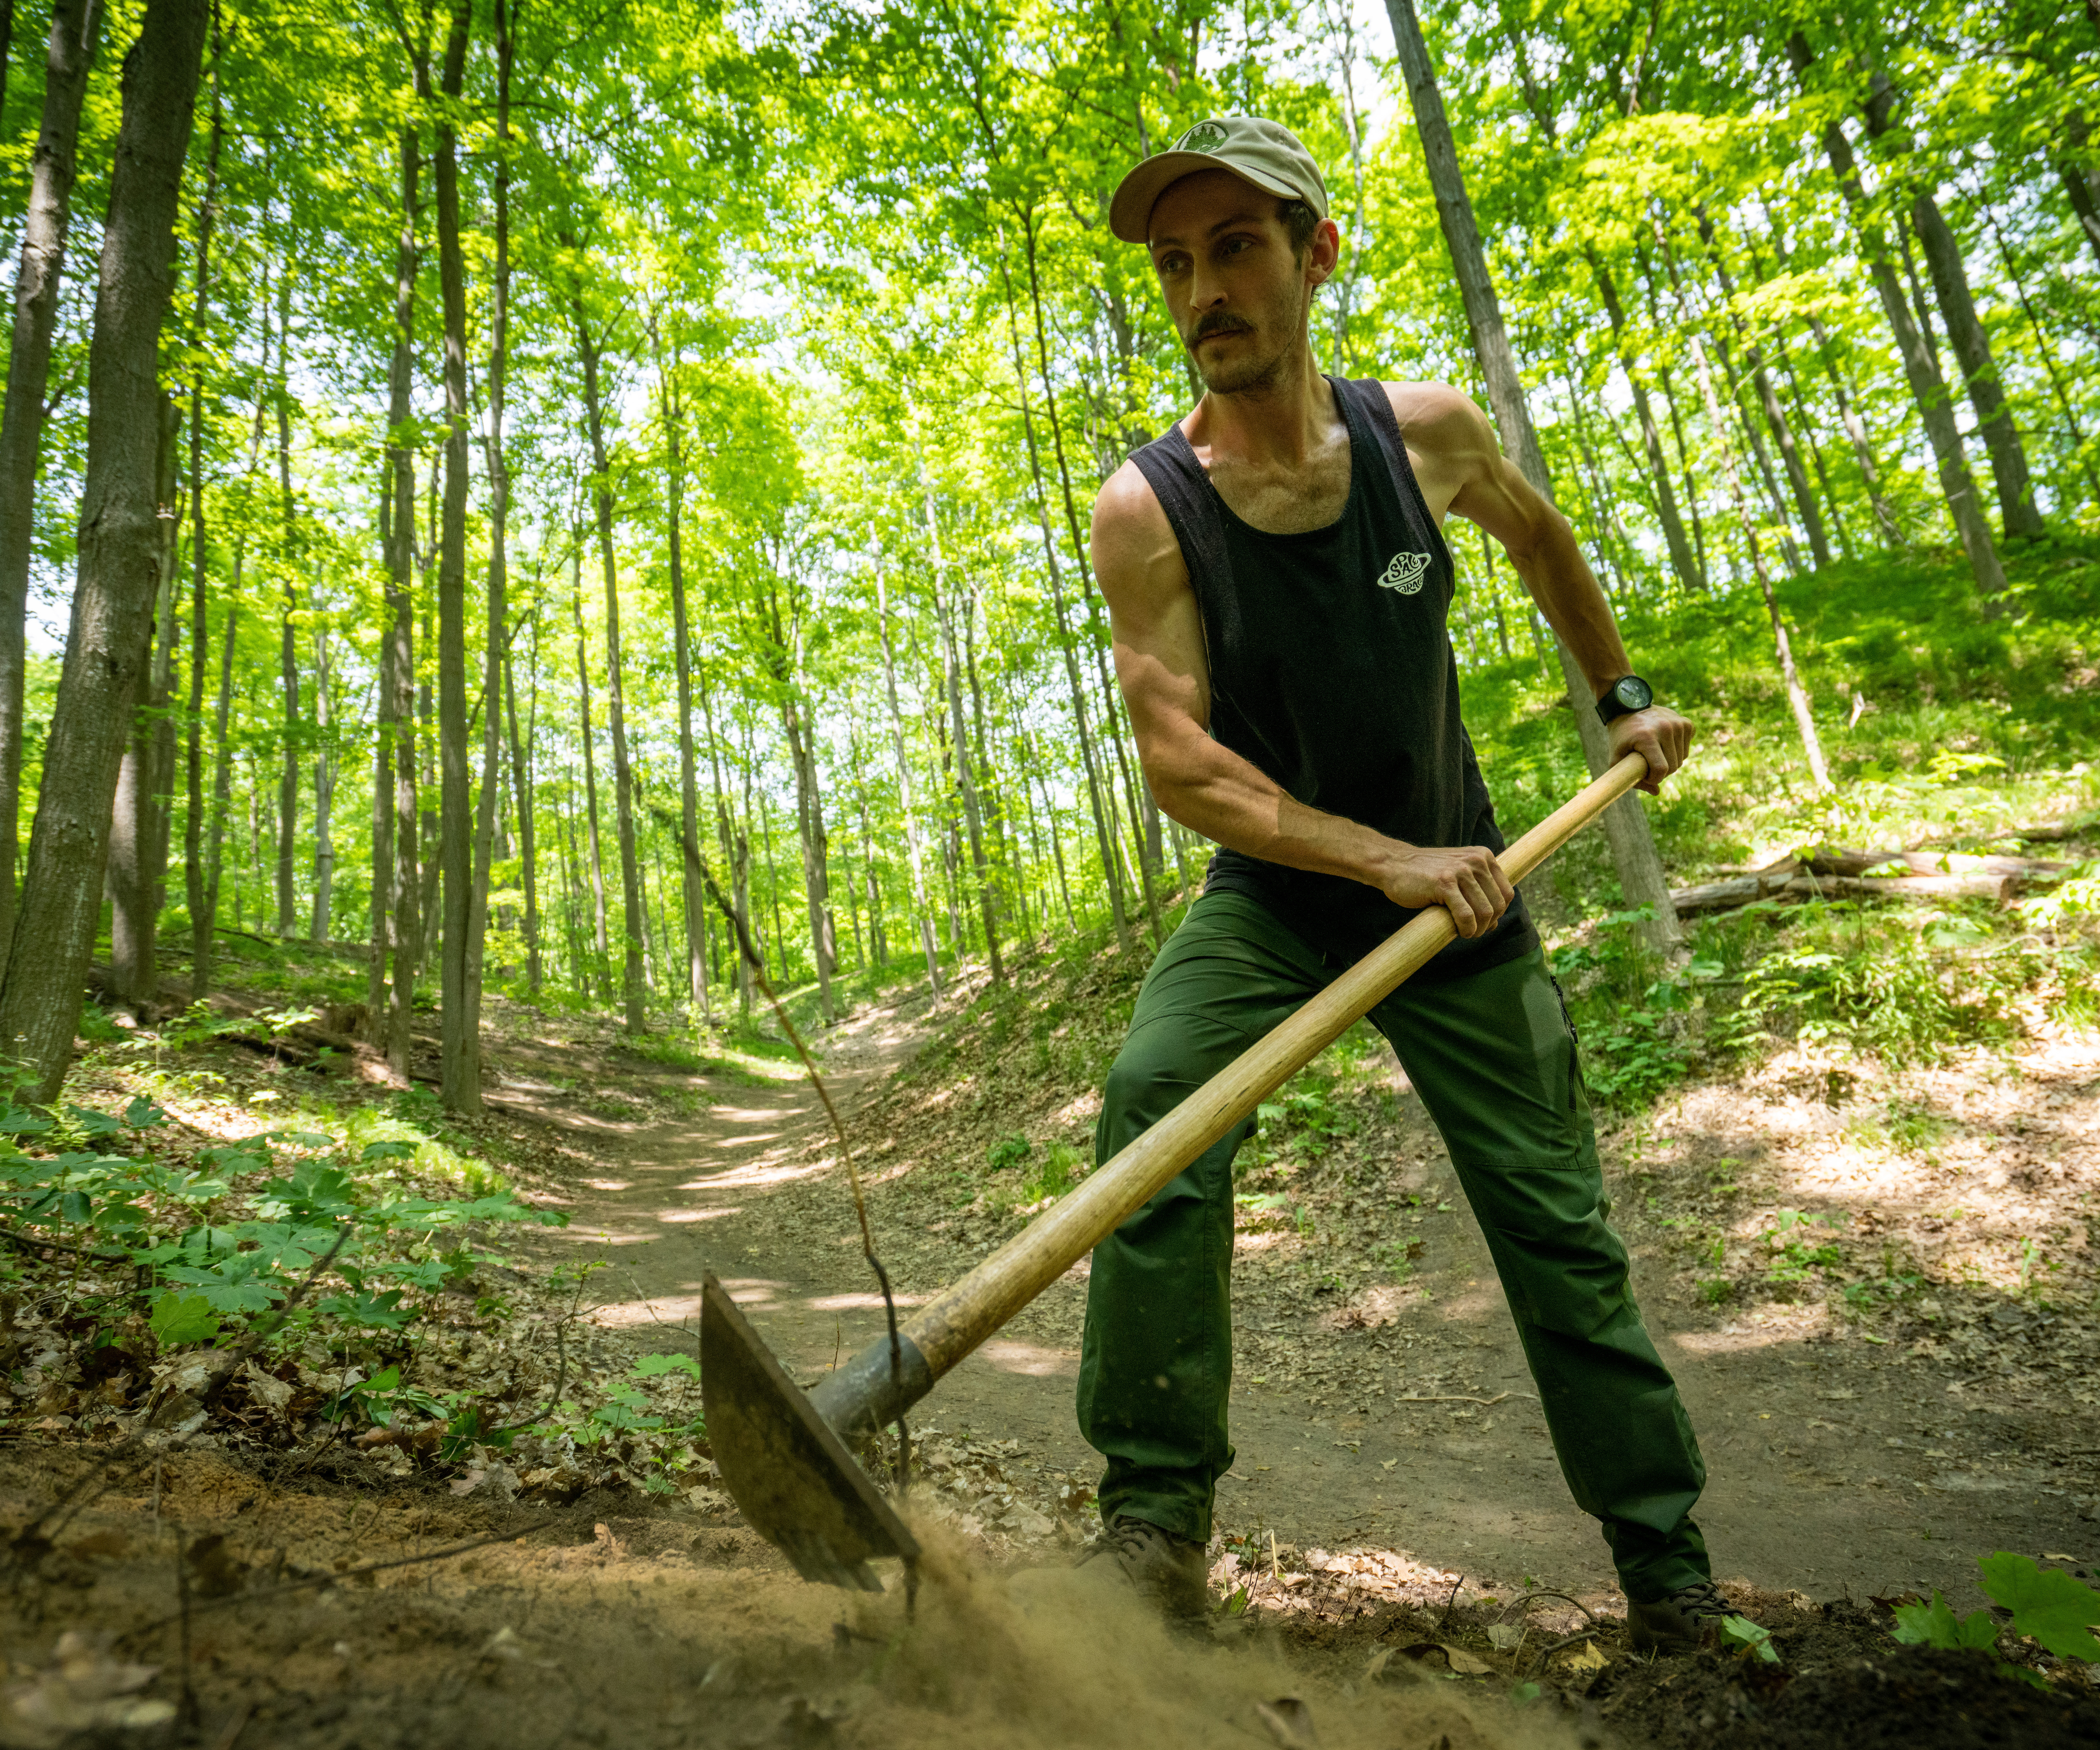 Man raking a trail with green trees in the background.